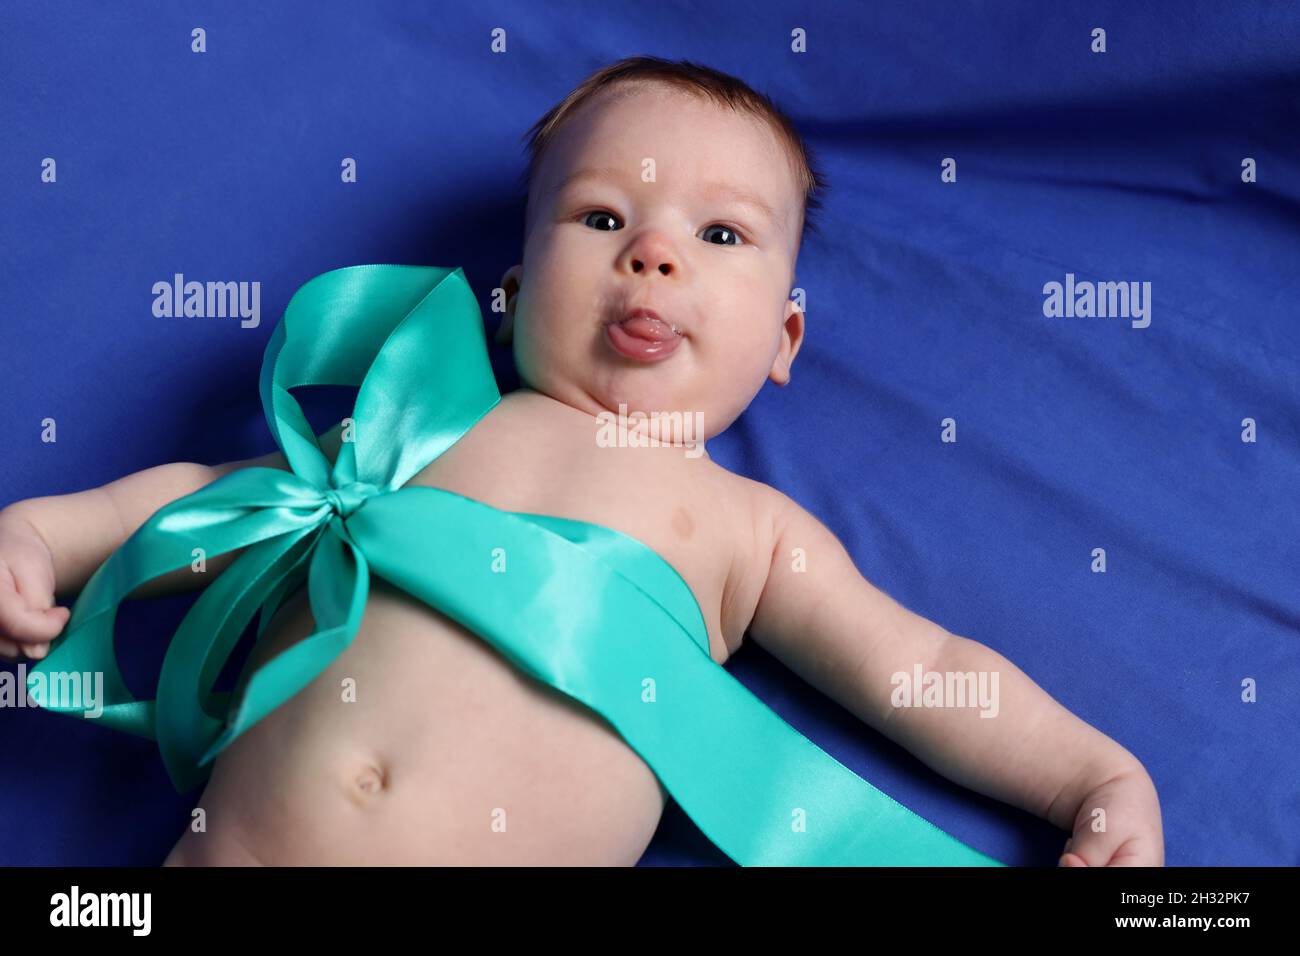 Little boy on the blue bed cover puts out tongue Stock Photo